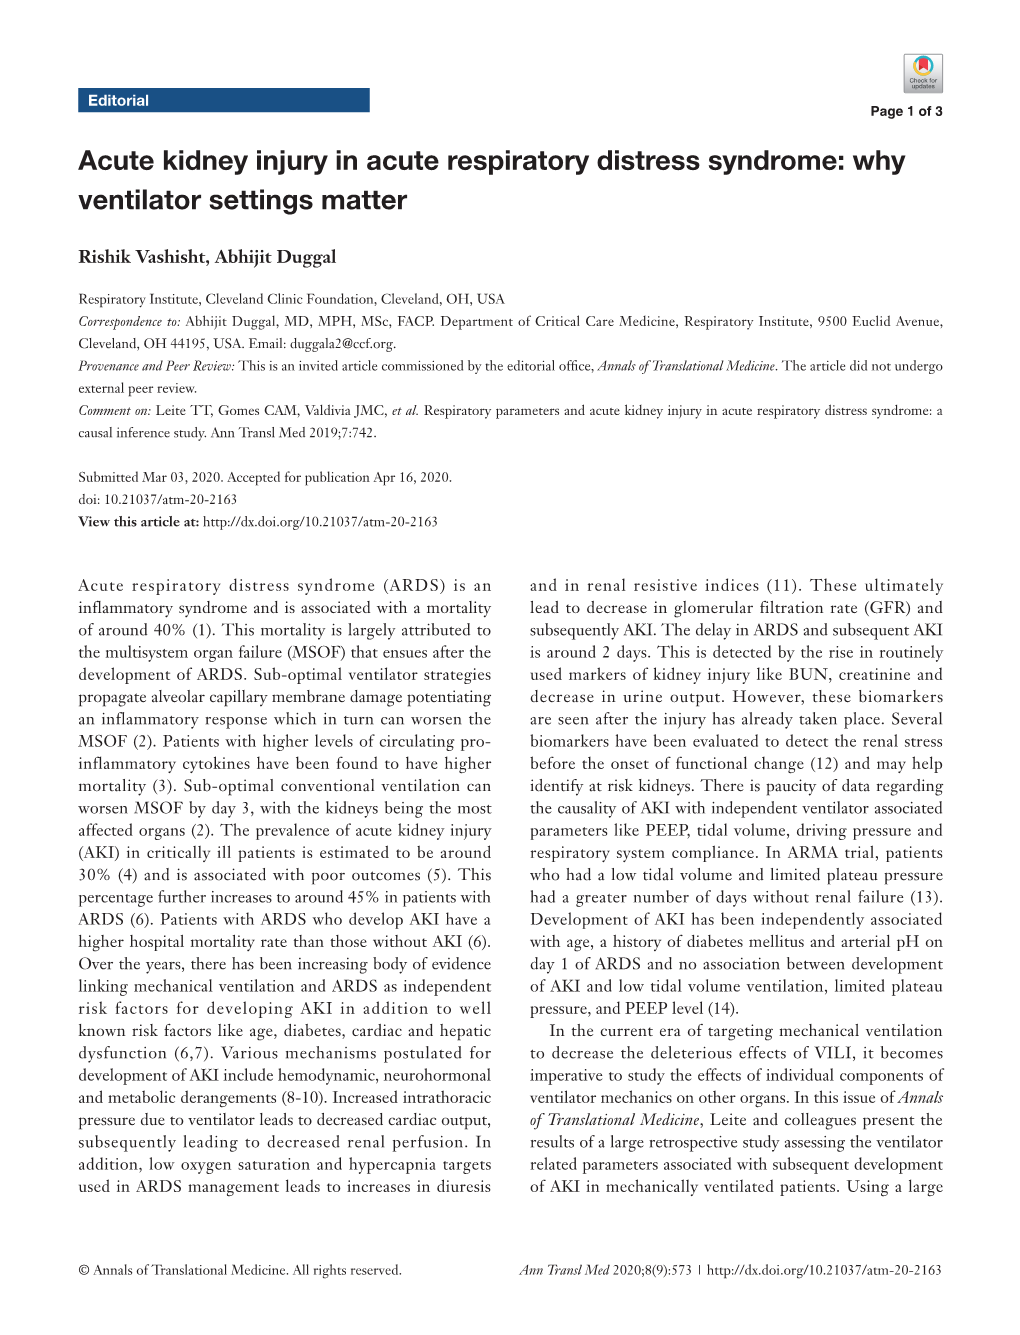 Acute Kidney Injury in Acute Respiratory Distress Syndrome: Why Ventilator Settings Matter